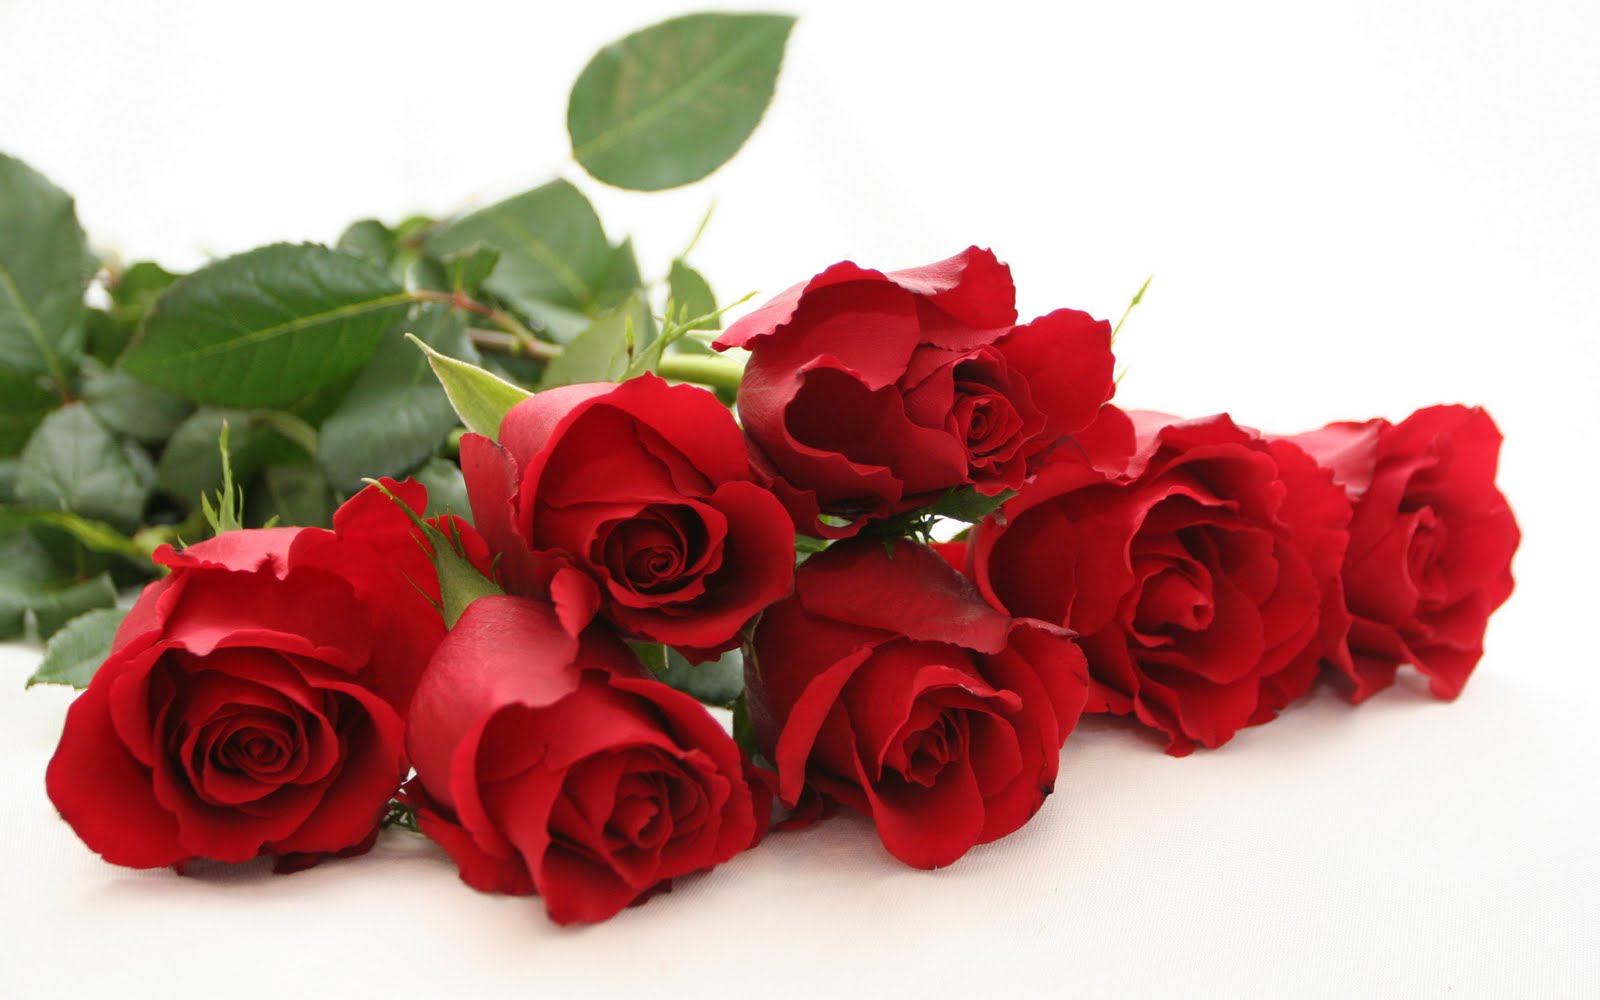 Red Roses Wallpapers HD A39 lovely